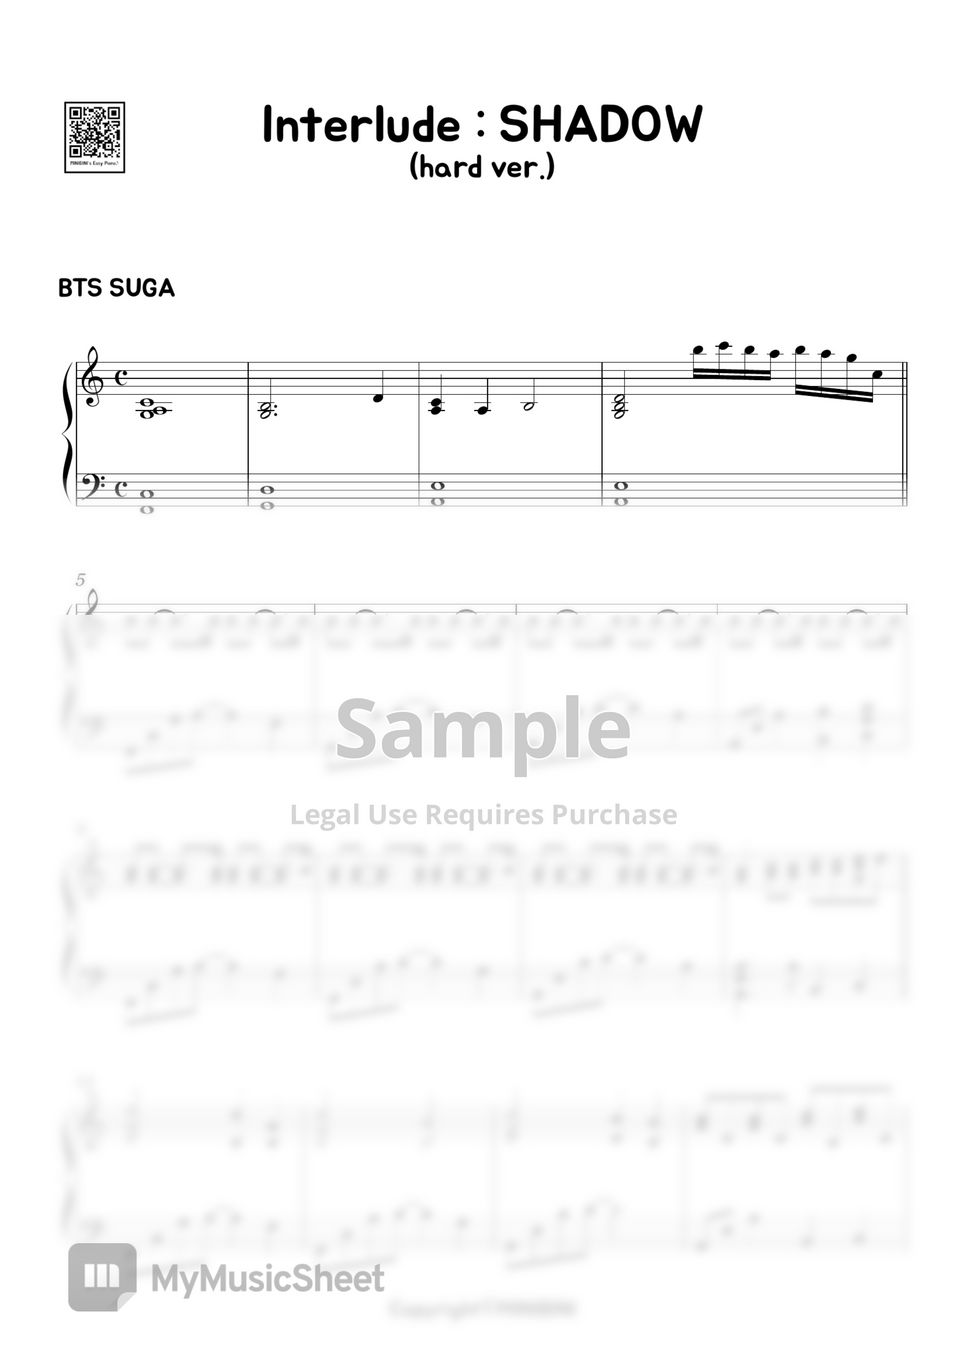 BTS (방탄소년단) - [MAP OF THE SOUL : 7] Full Album Package (Hard Version) by MINIBINI